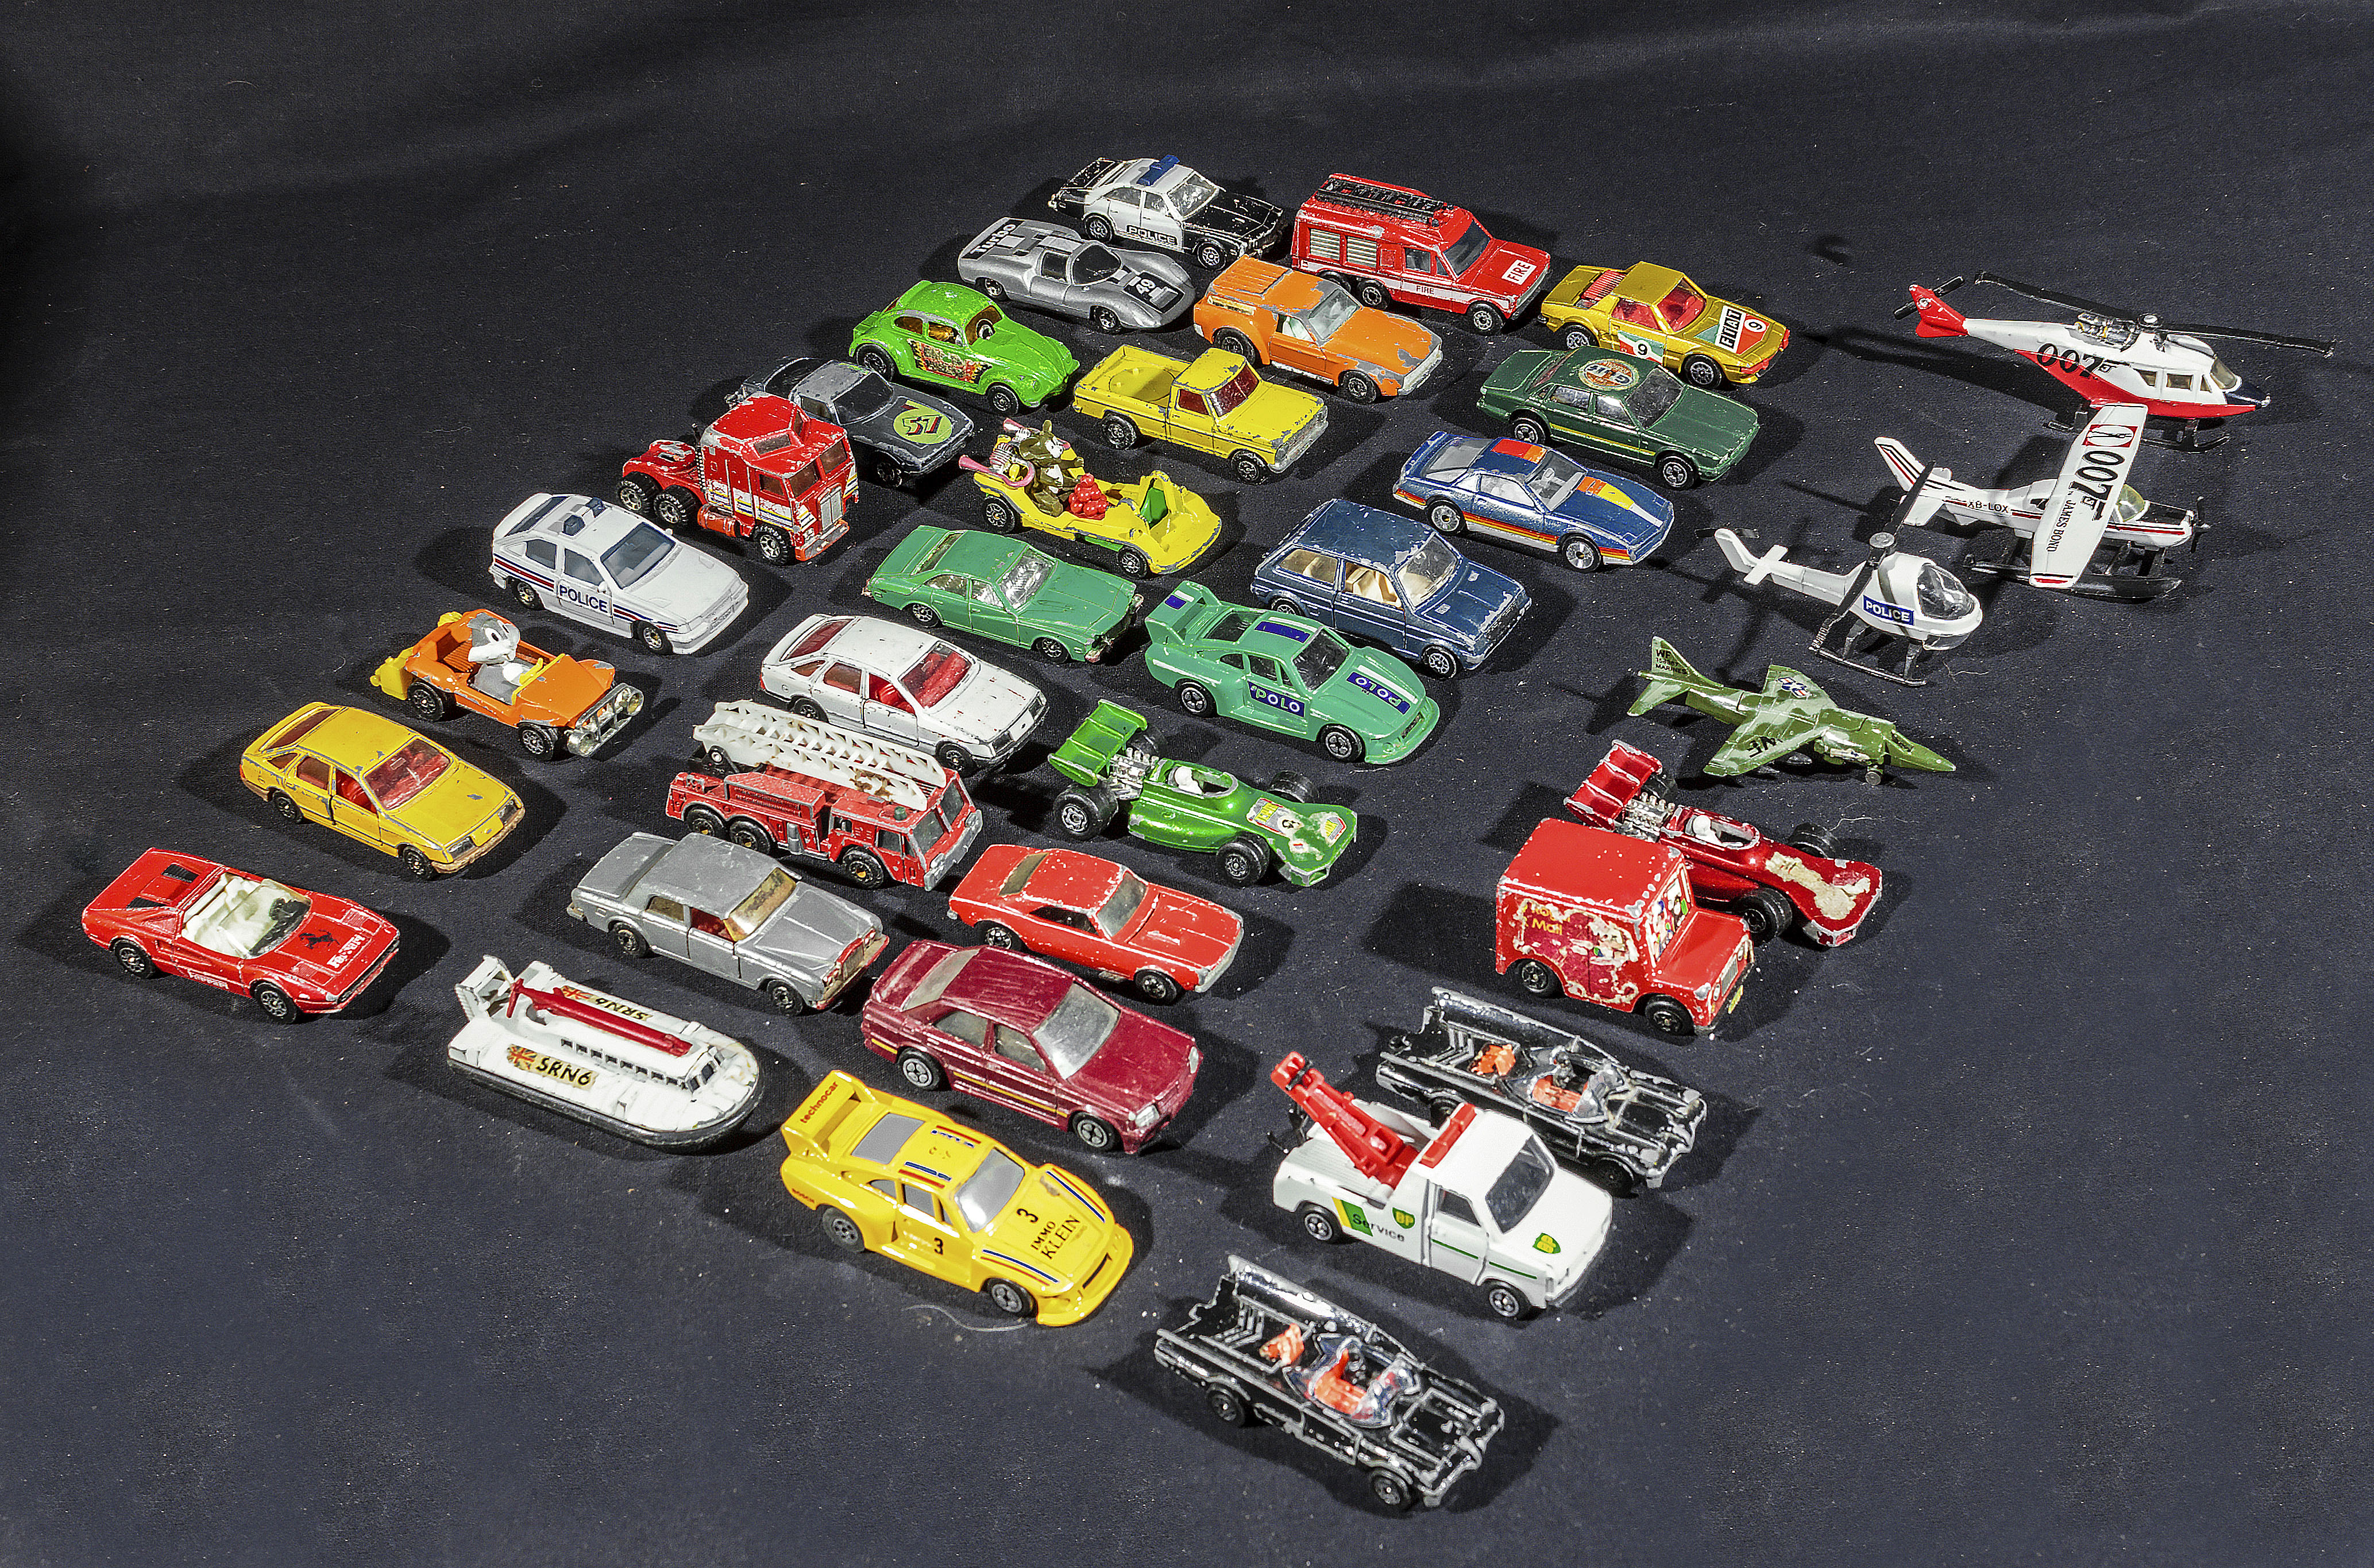 A collection of model die cast vehicles and aircraft